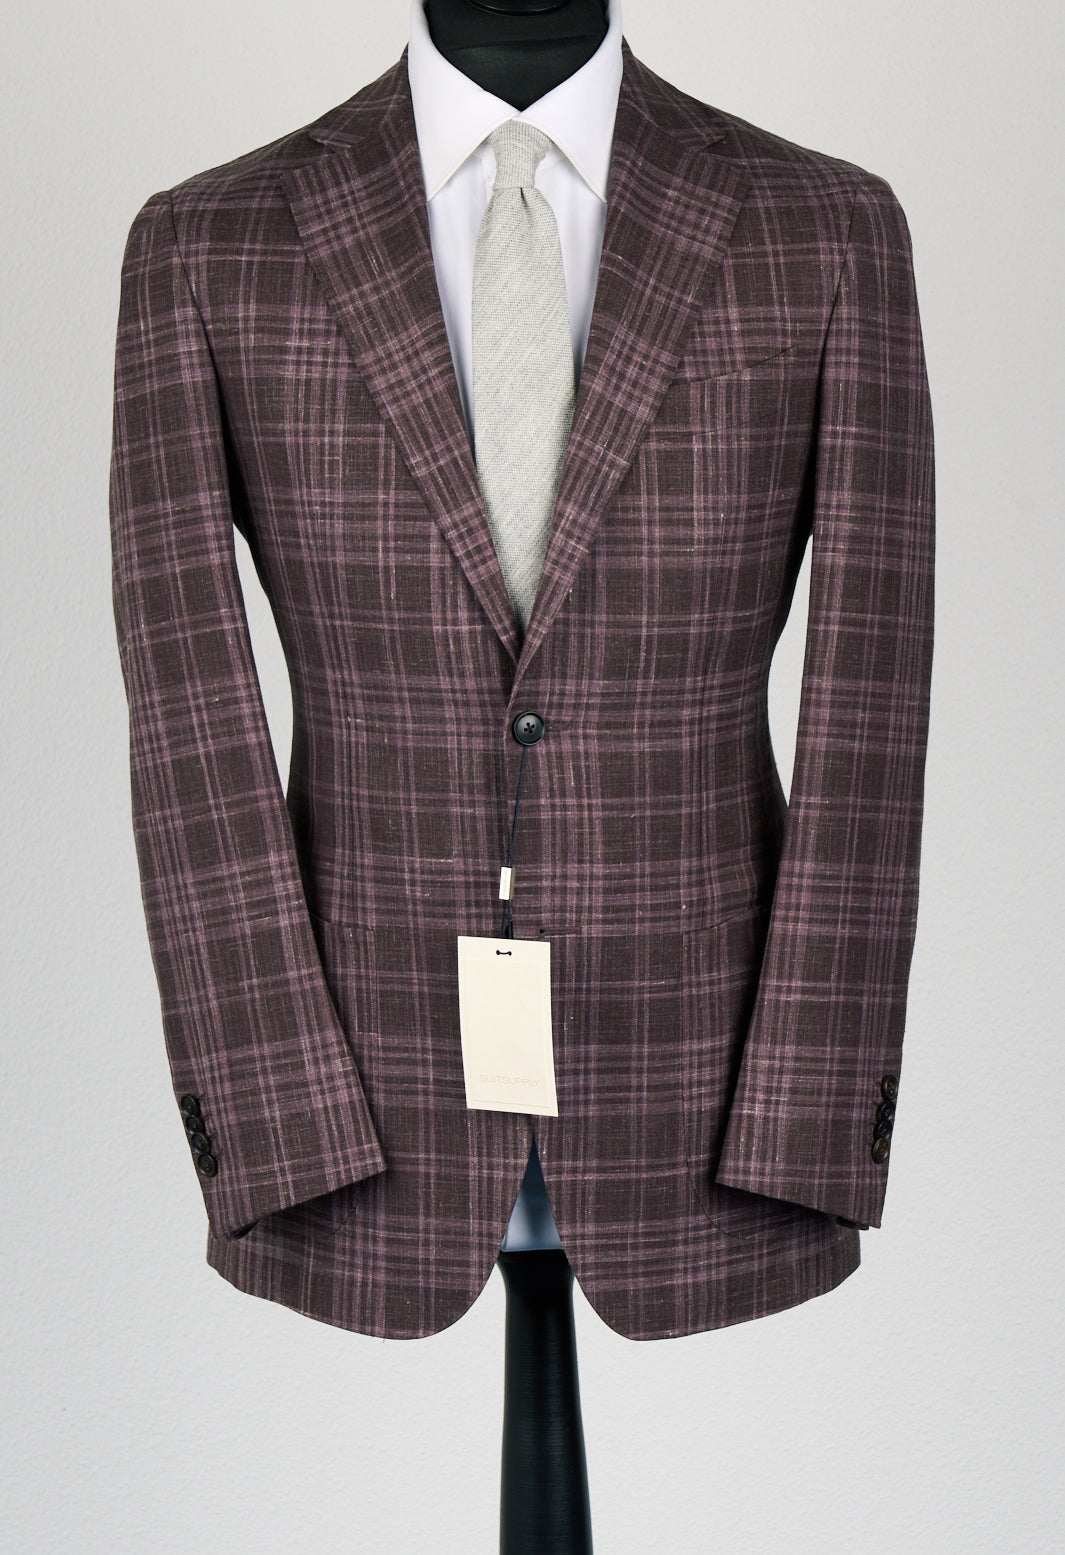 New Suitsupply Havana Purple Check Wool, Tussah Silk and Linen Zegna Blazer - Size 38R and 40R